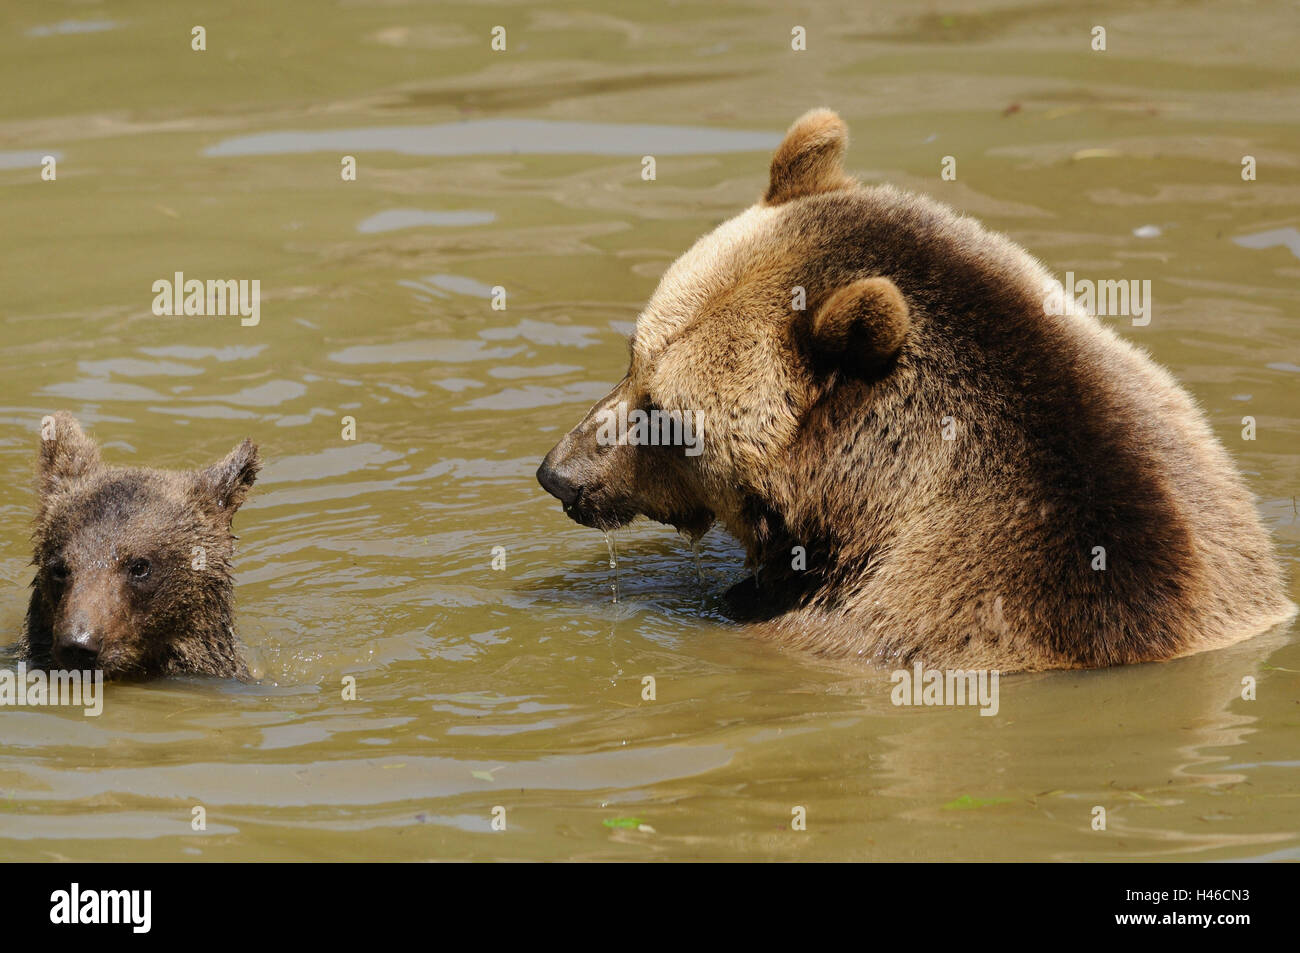 Brown bears, Ursus arctos, nut with young animal, water, head-on, Stock Photo